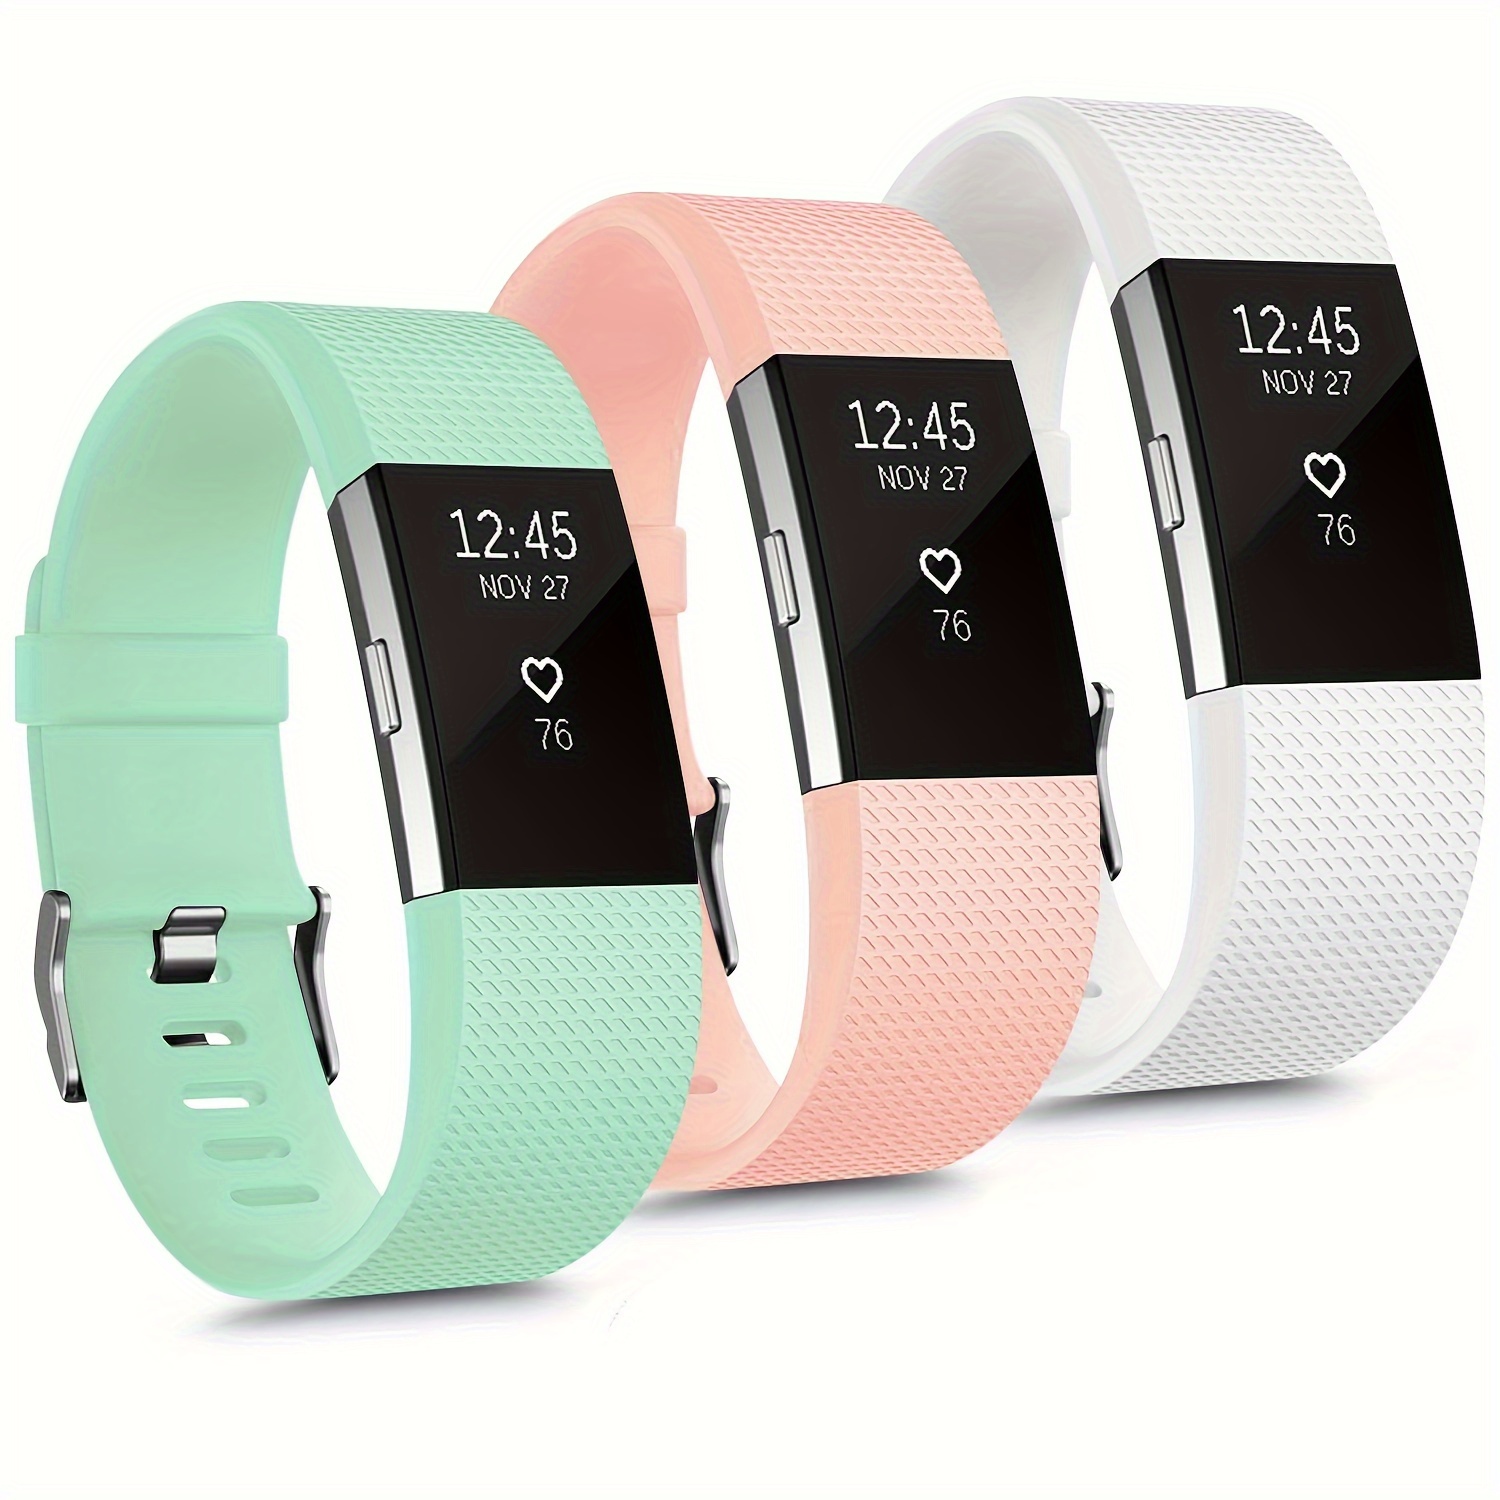 Bitbelt Band Lock for Magicband, Fitbit,Vivofit- 2 Pack 90 Day Warranty. We  Invented The Fitbit